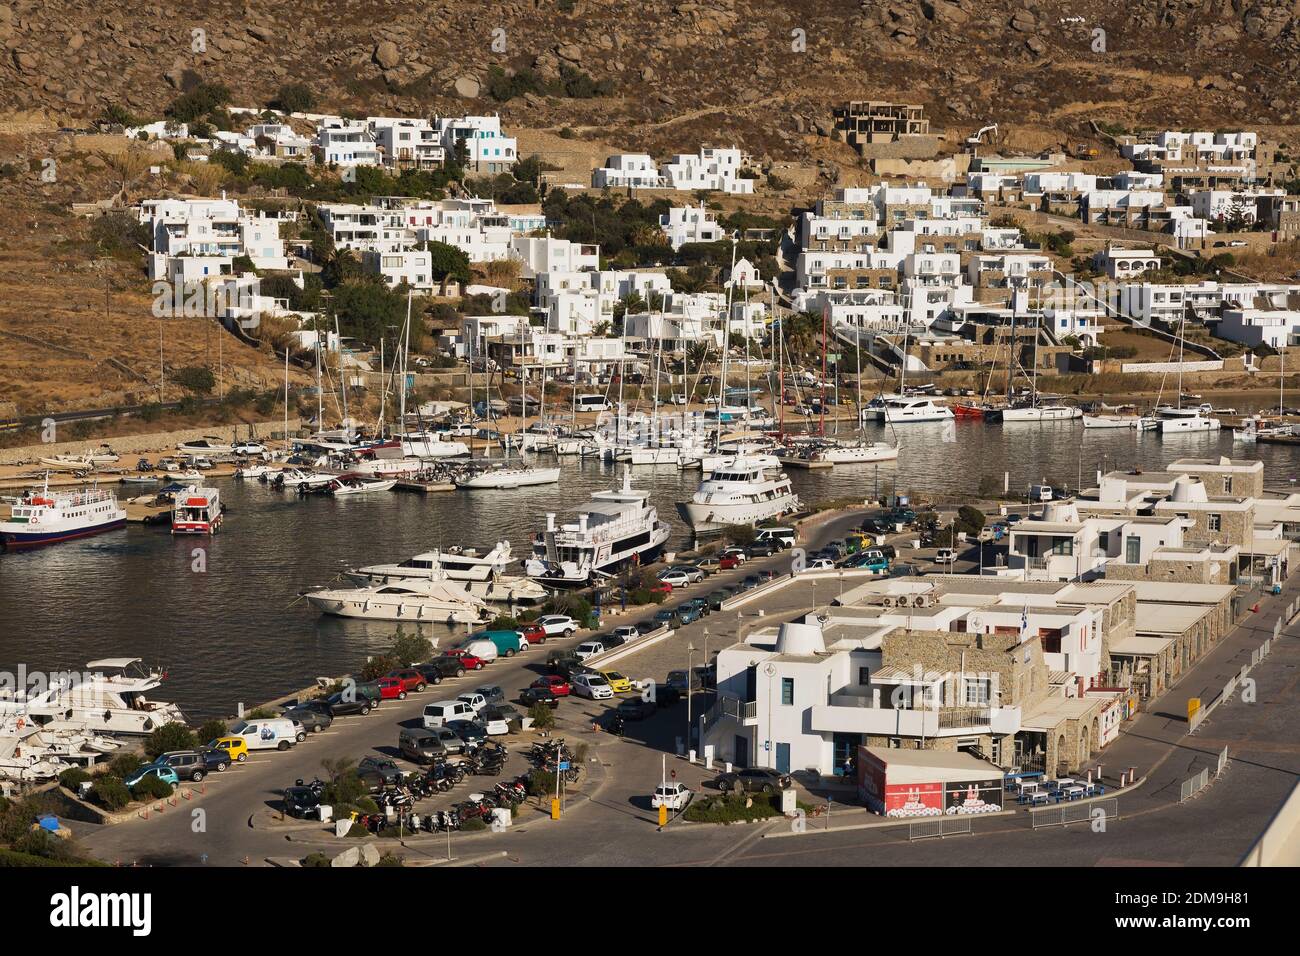 Top view of small boats and private yachts in Mykonos new port marina, Mykonos Island, Greece Stock Photo